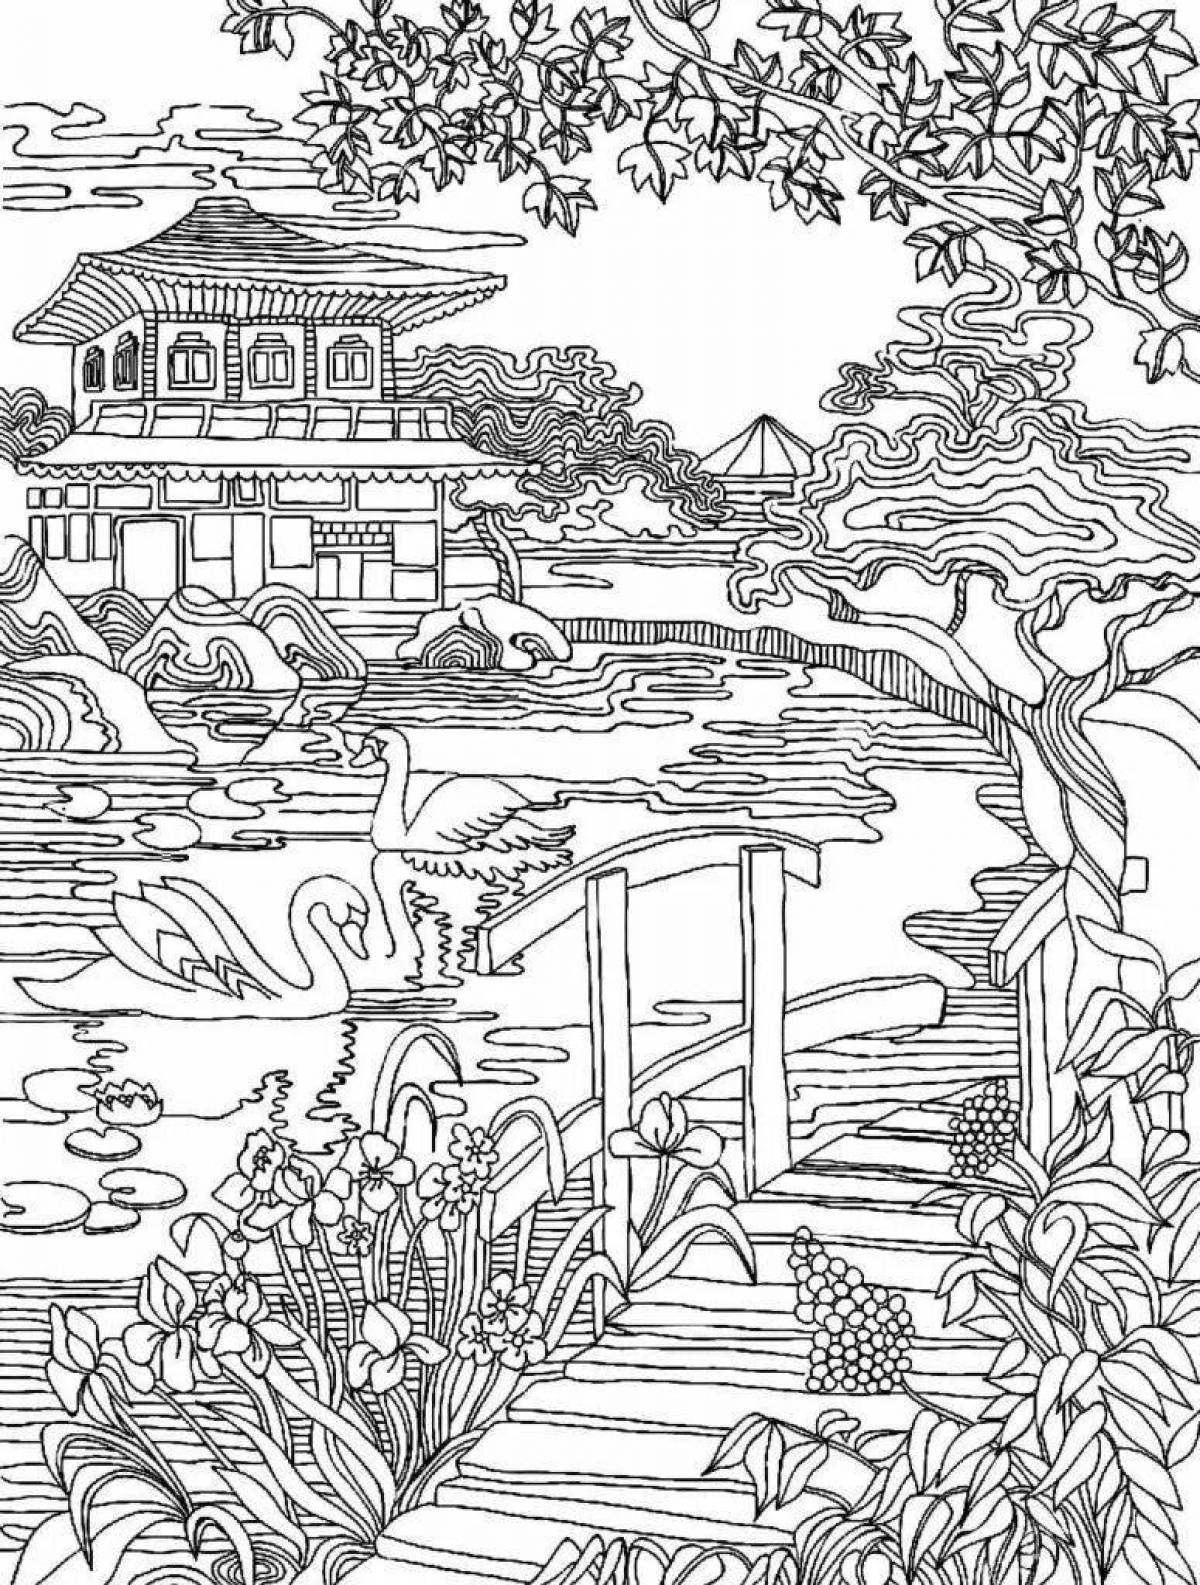 Great coloring book with chinese motifs